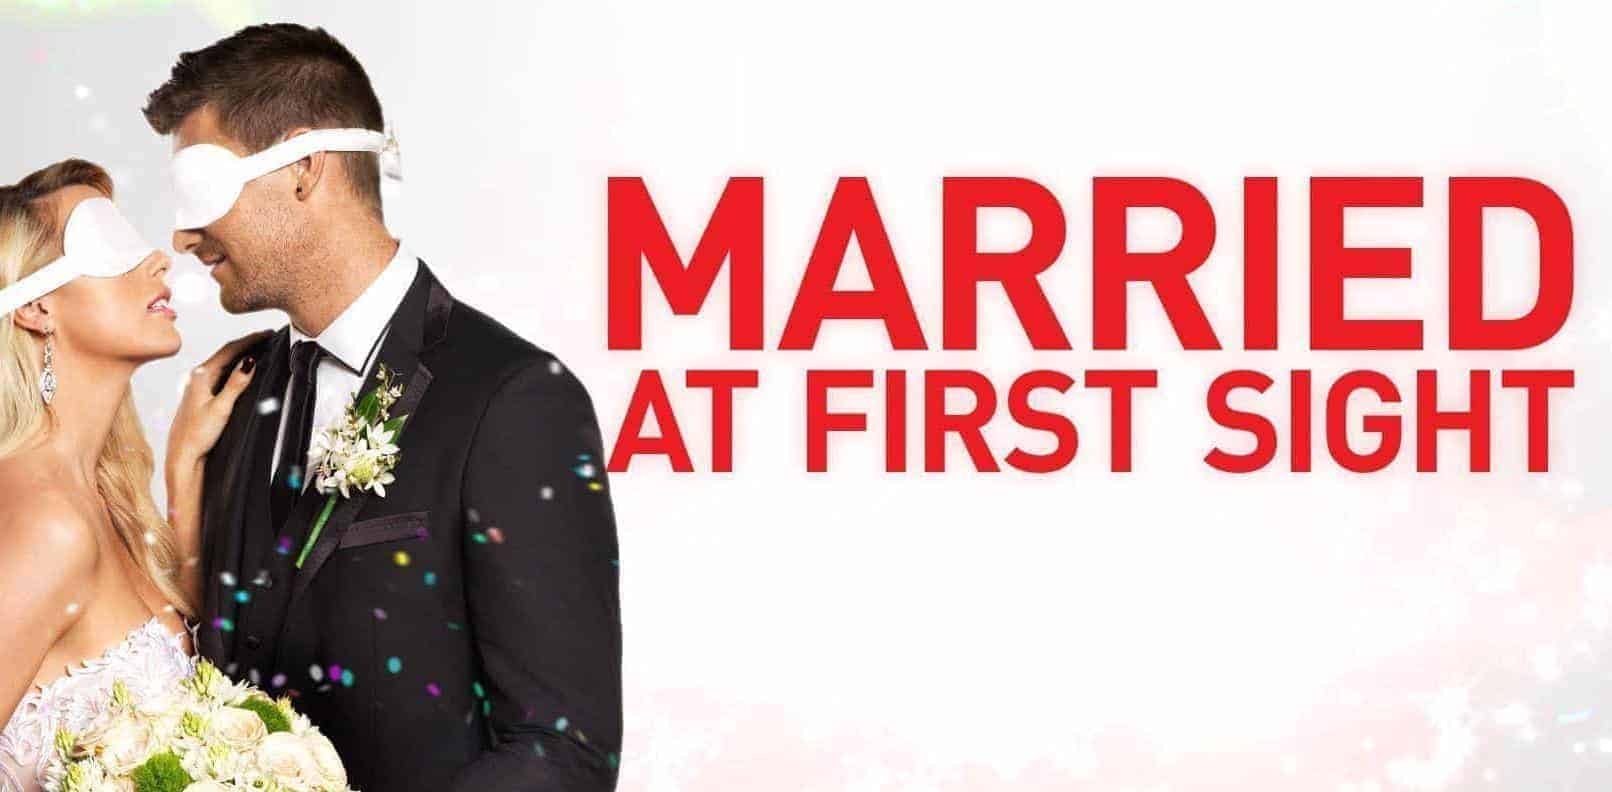 Married At First Sight Australia11 1 1 1 1